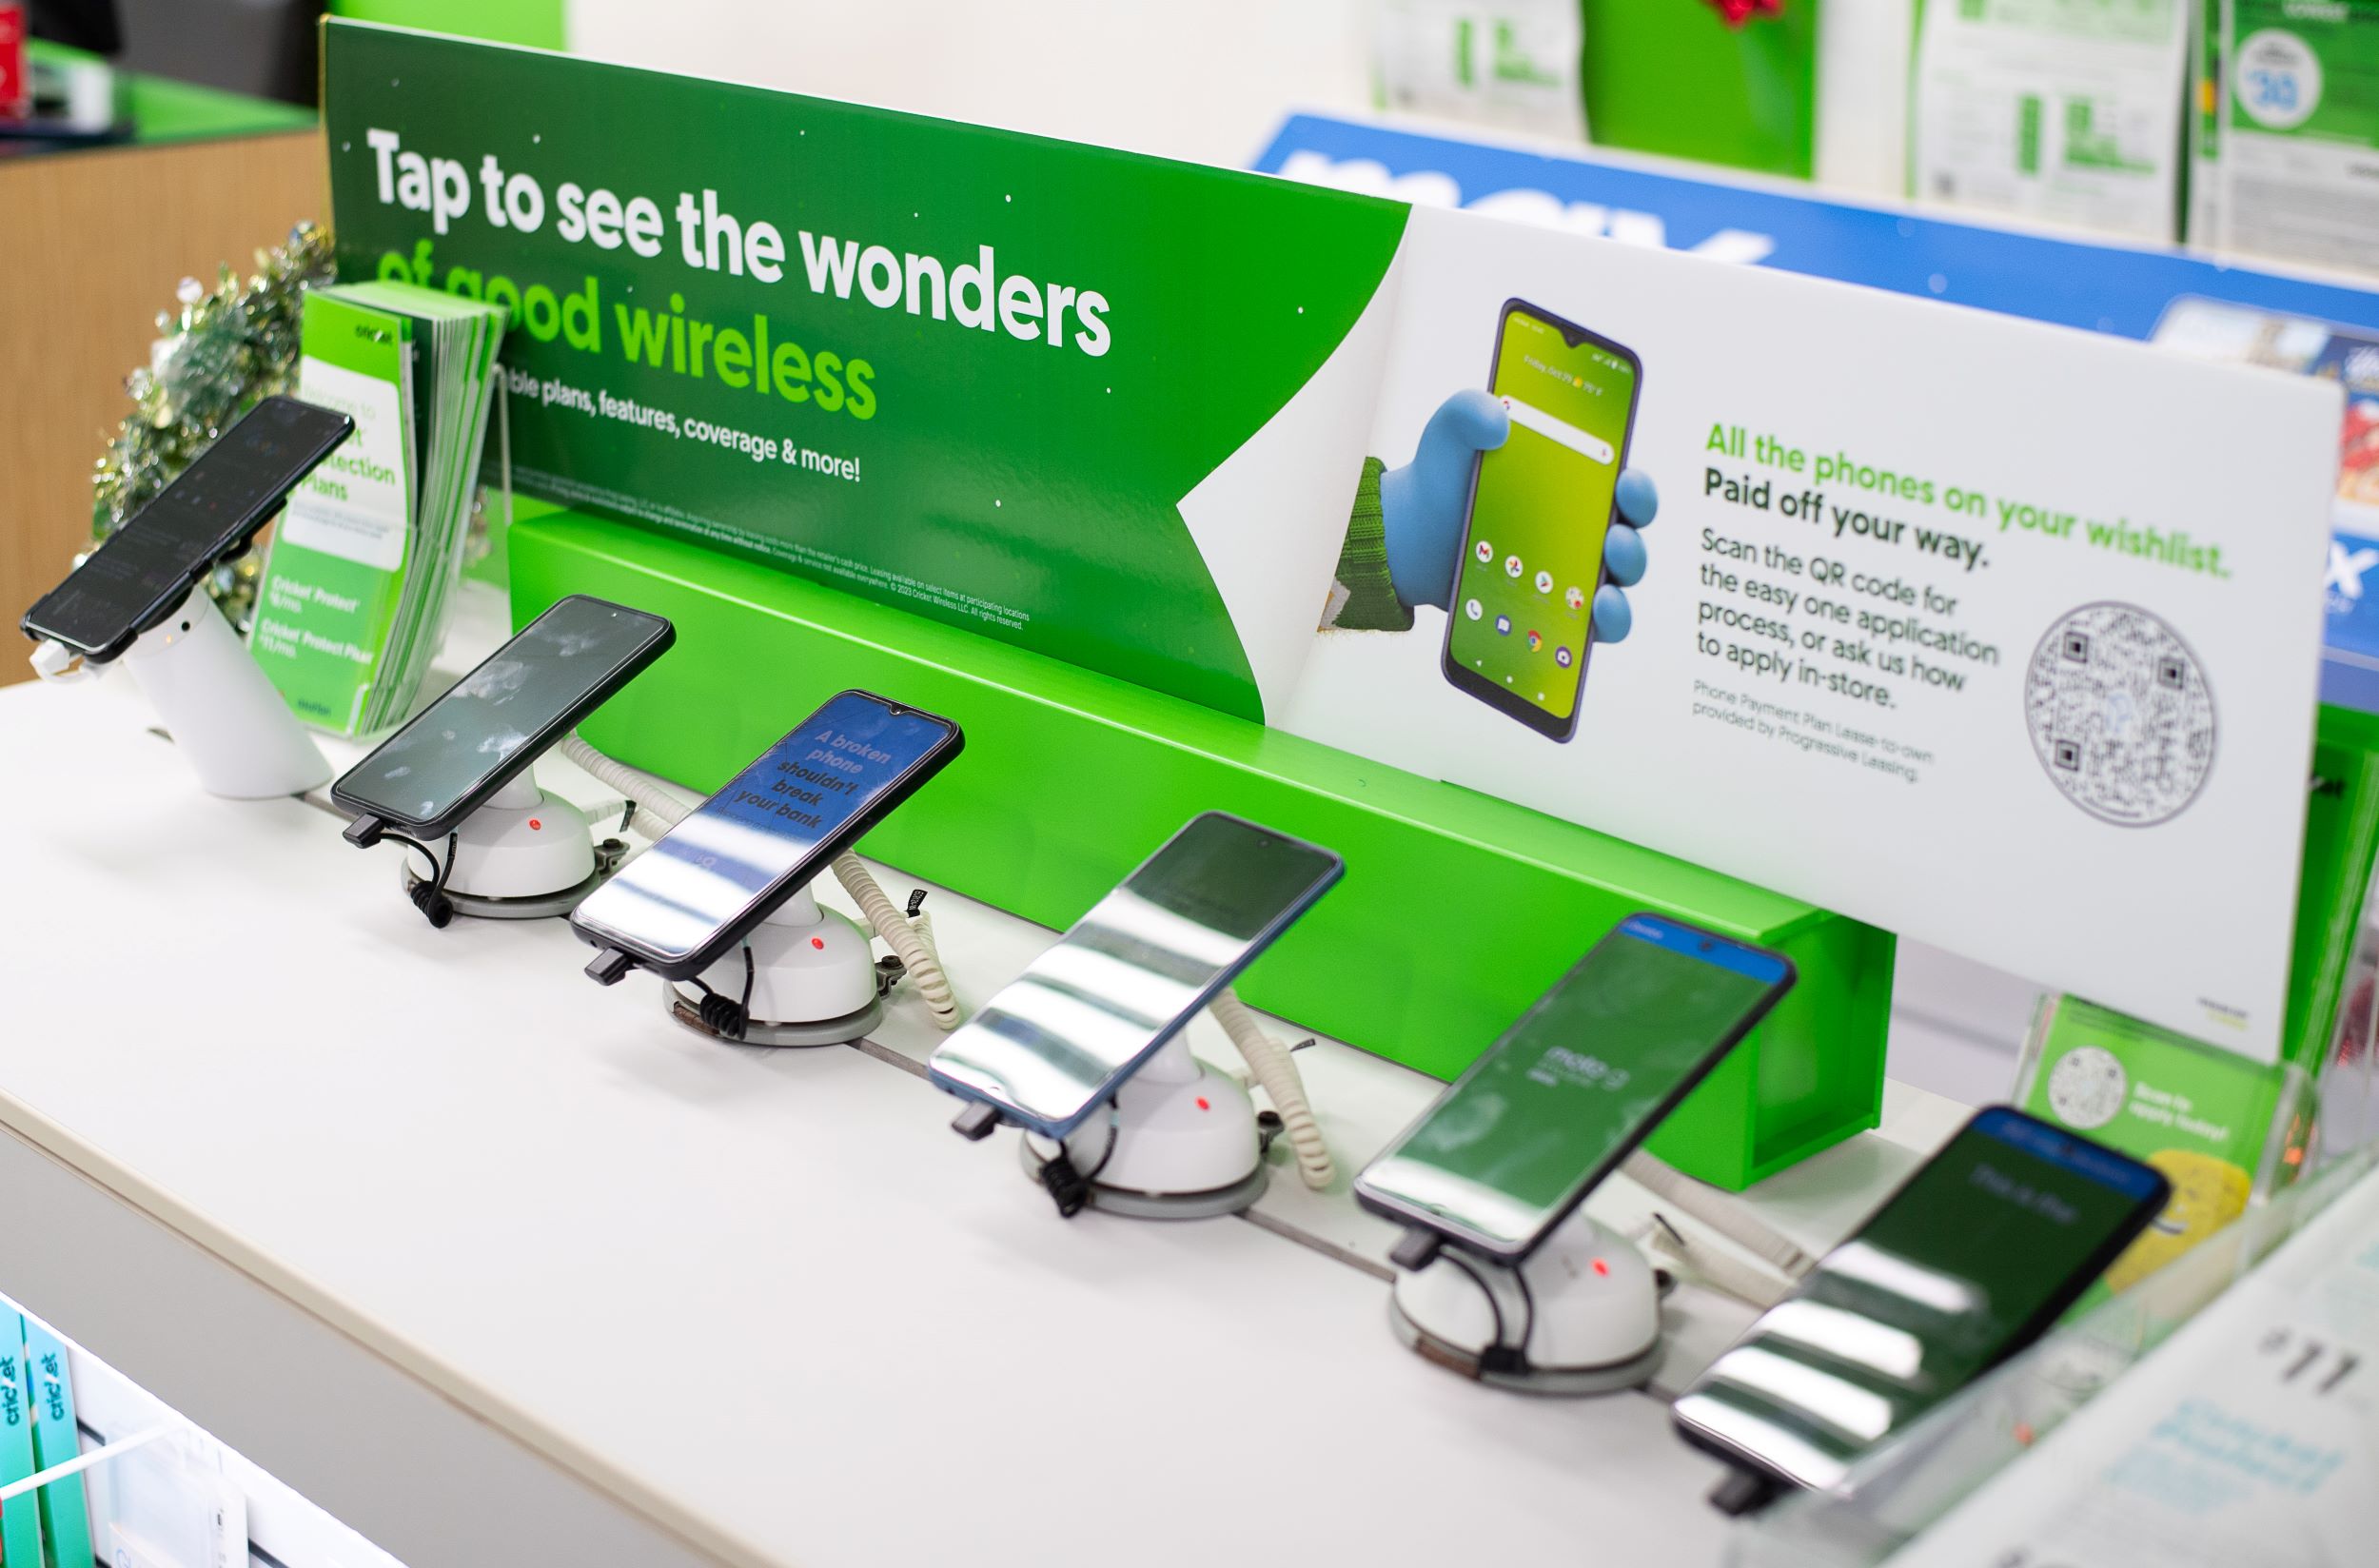 A display of smartphones on a store counter under signs promoting wireless services and special offers, with some green holiday decorations visible.